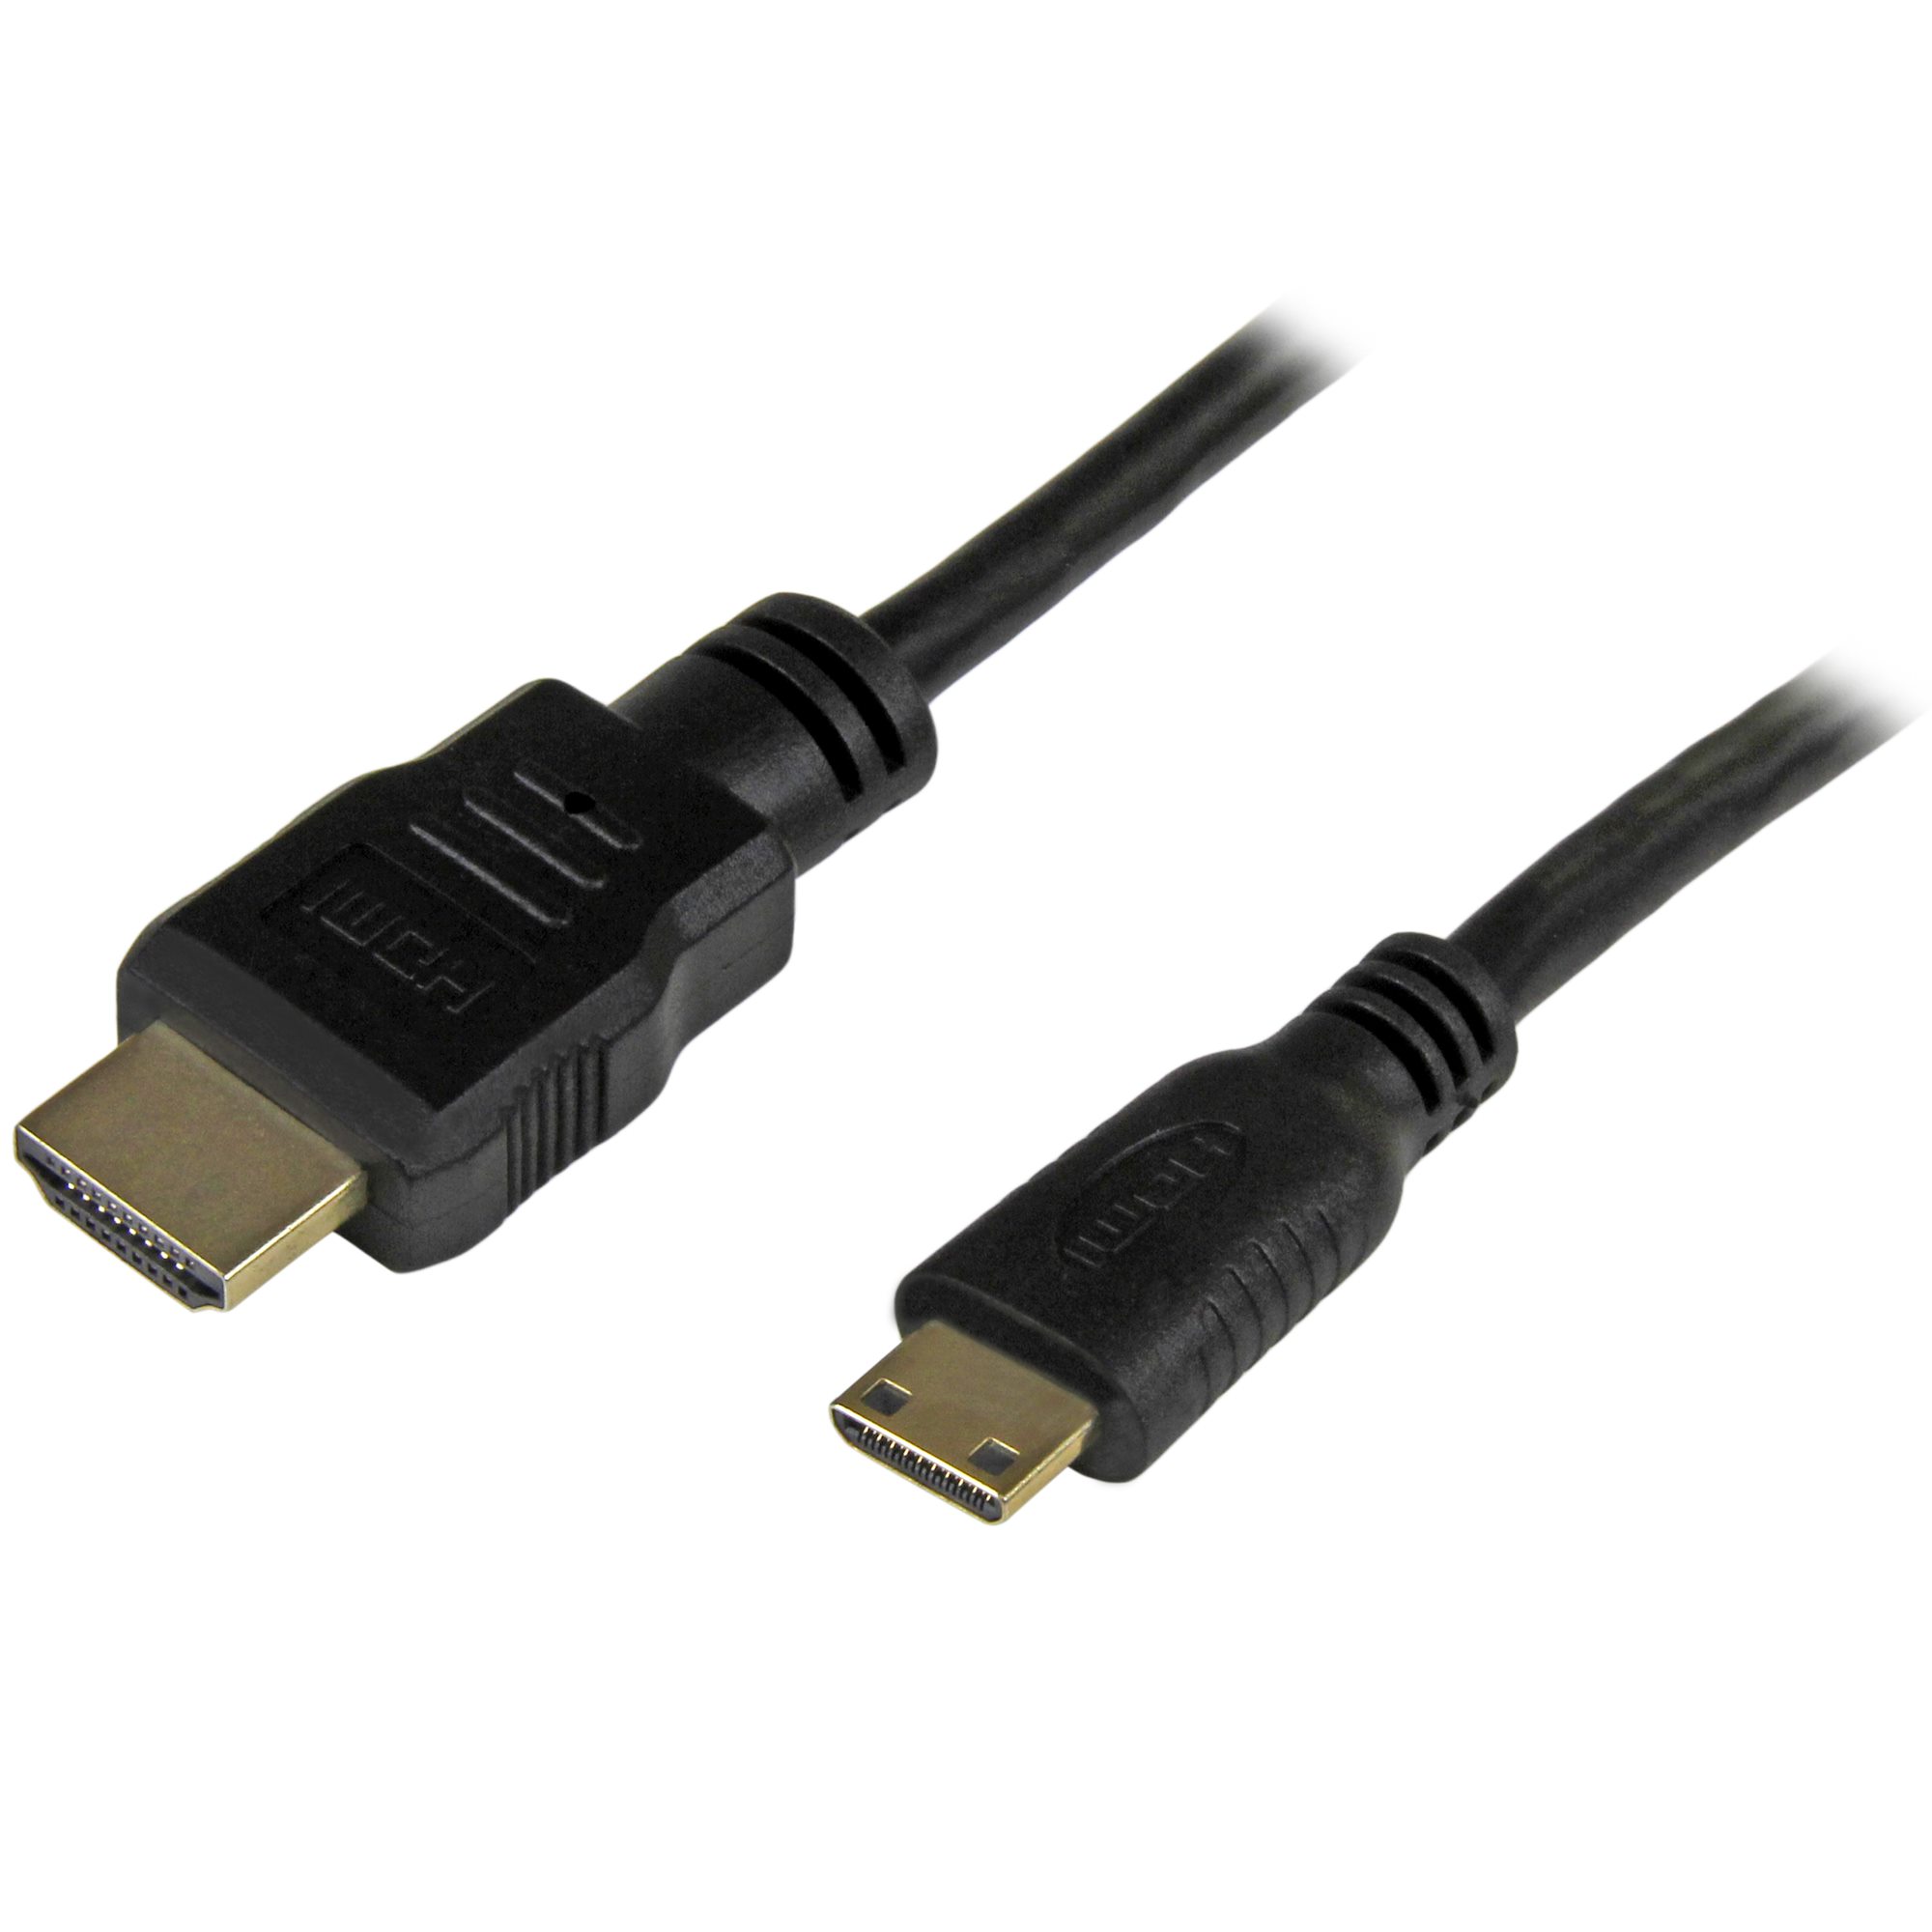 Mini HDMI Type C Female to HDMI Type A Male Adapter for Standard HDMI Ports 